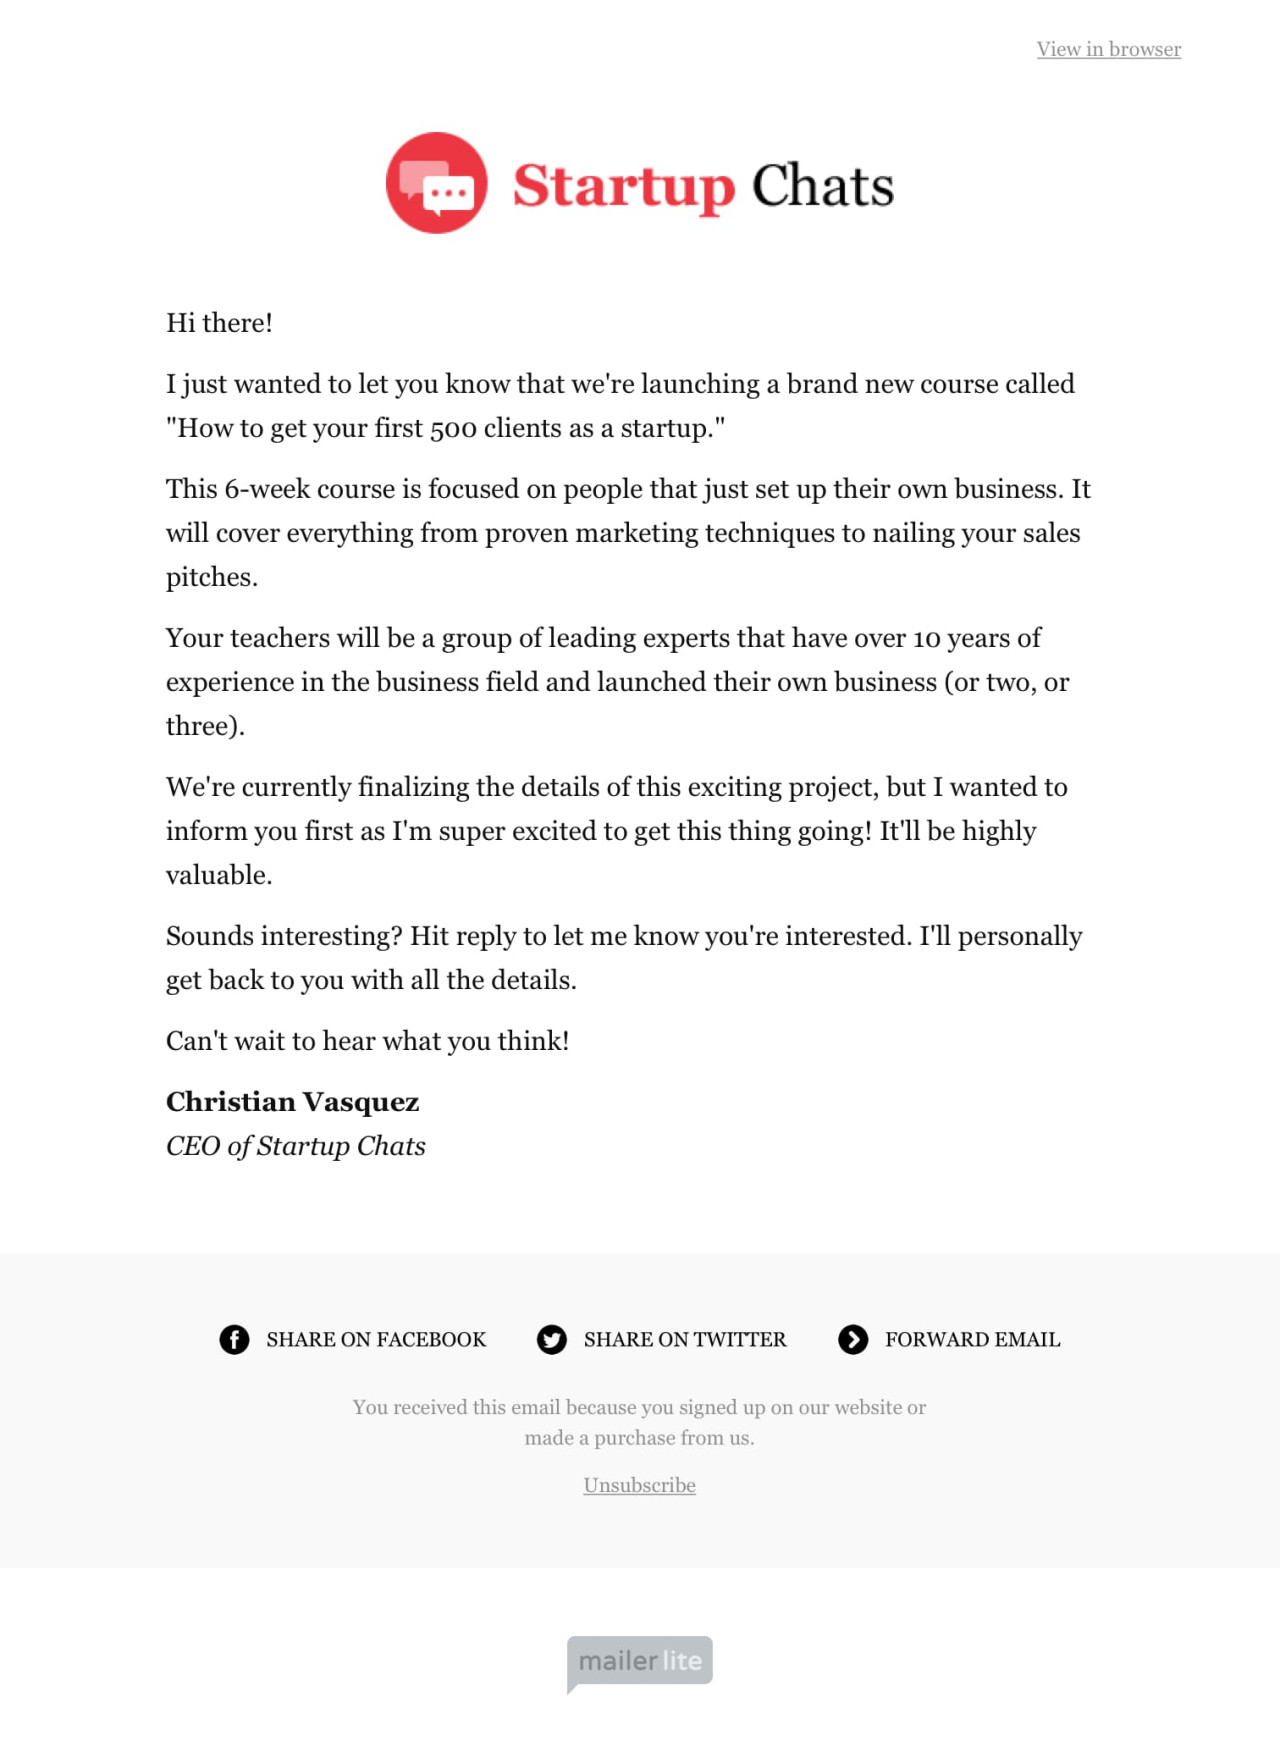 Letter email template - Made by MailerLite